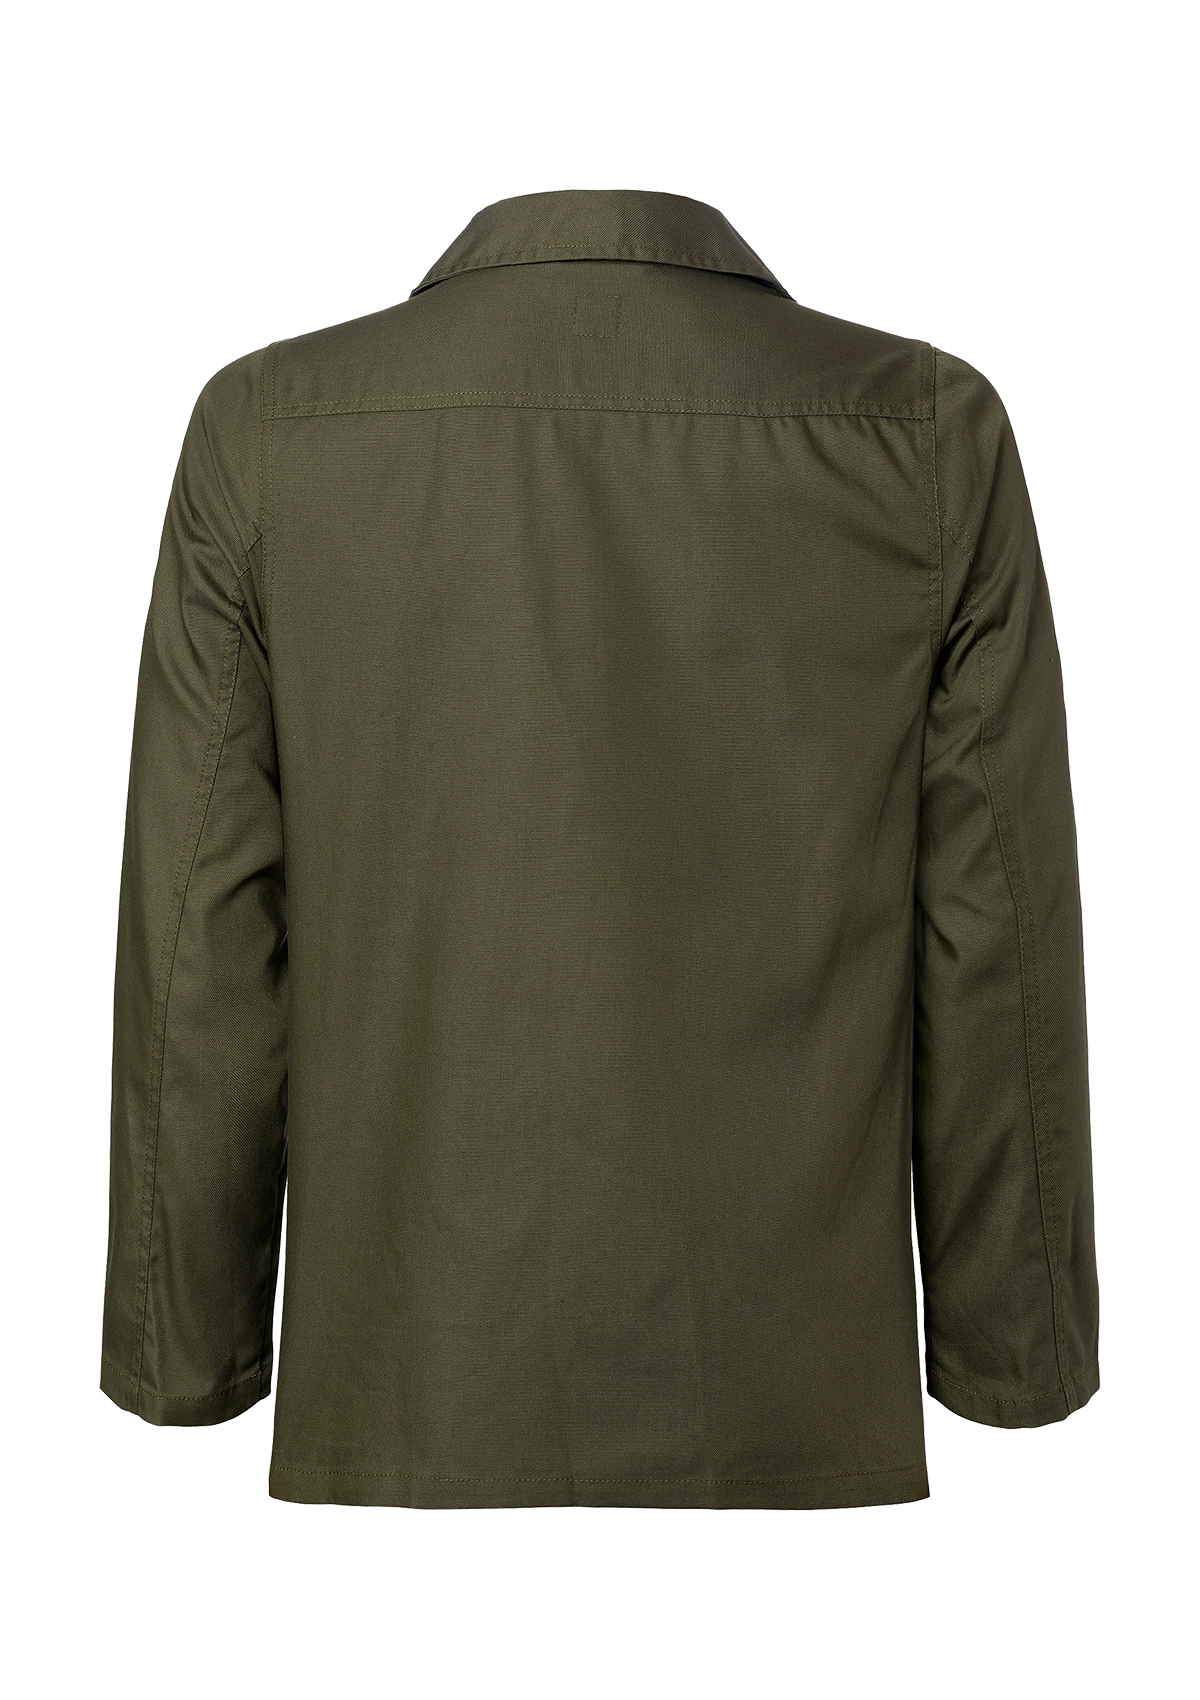 Unisex Chef's jacket with classic collar and long sleeves. Segers | Cookniche